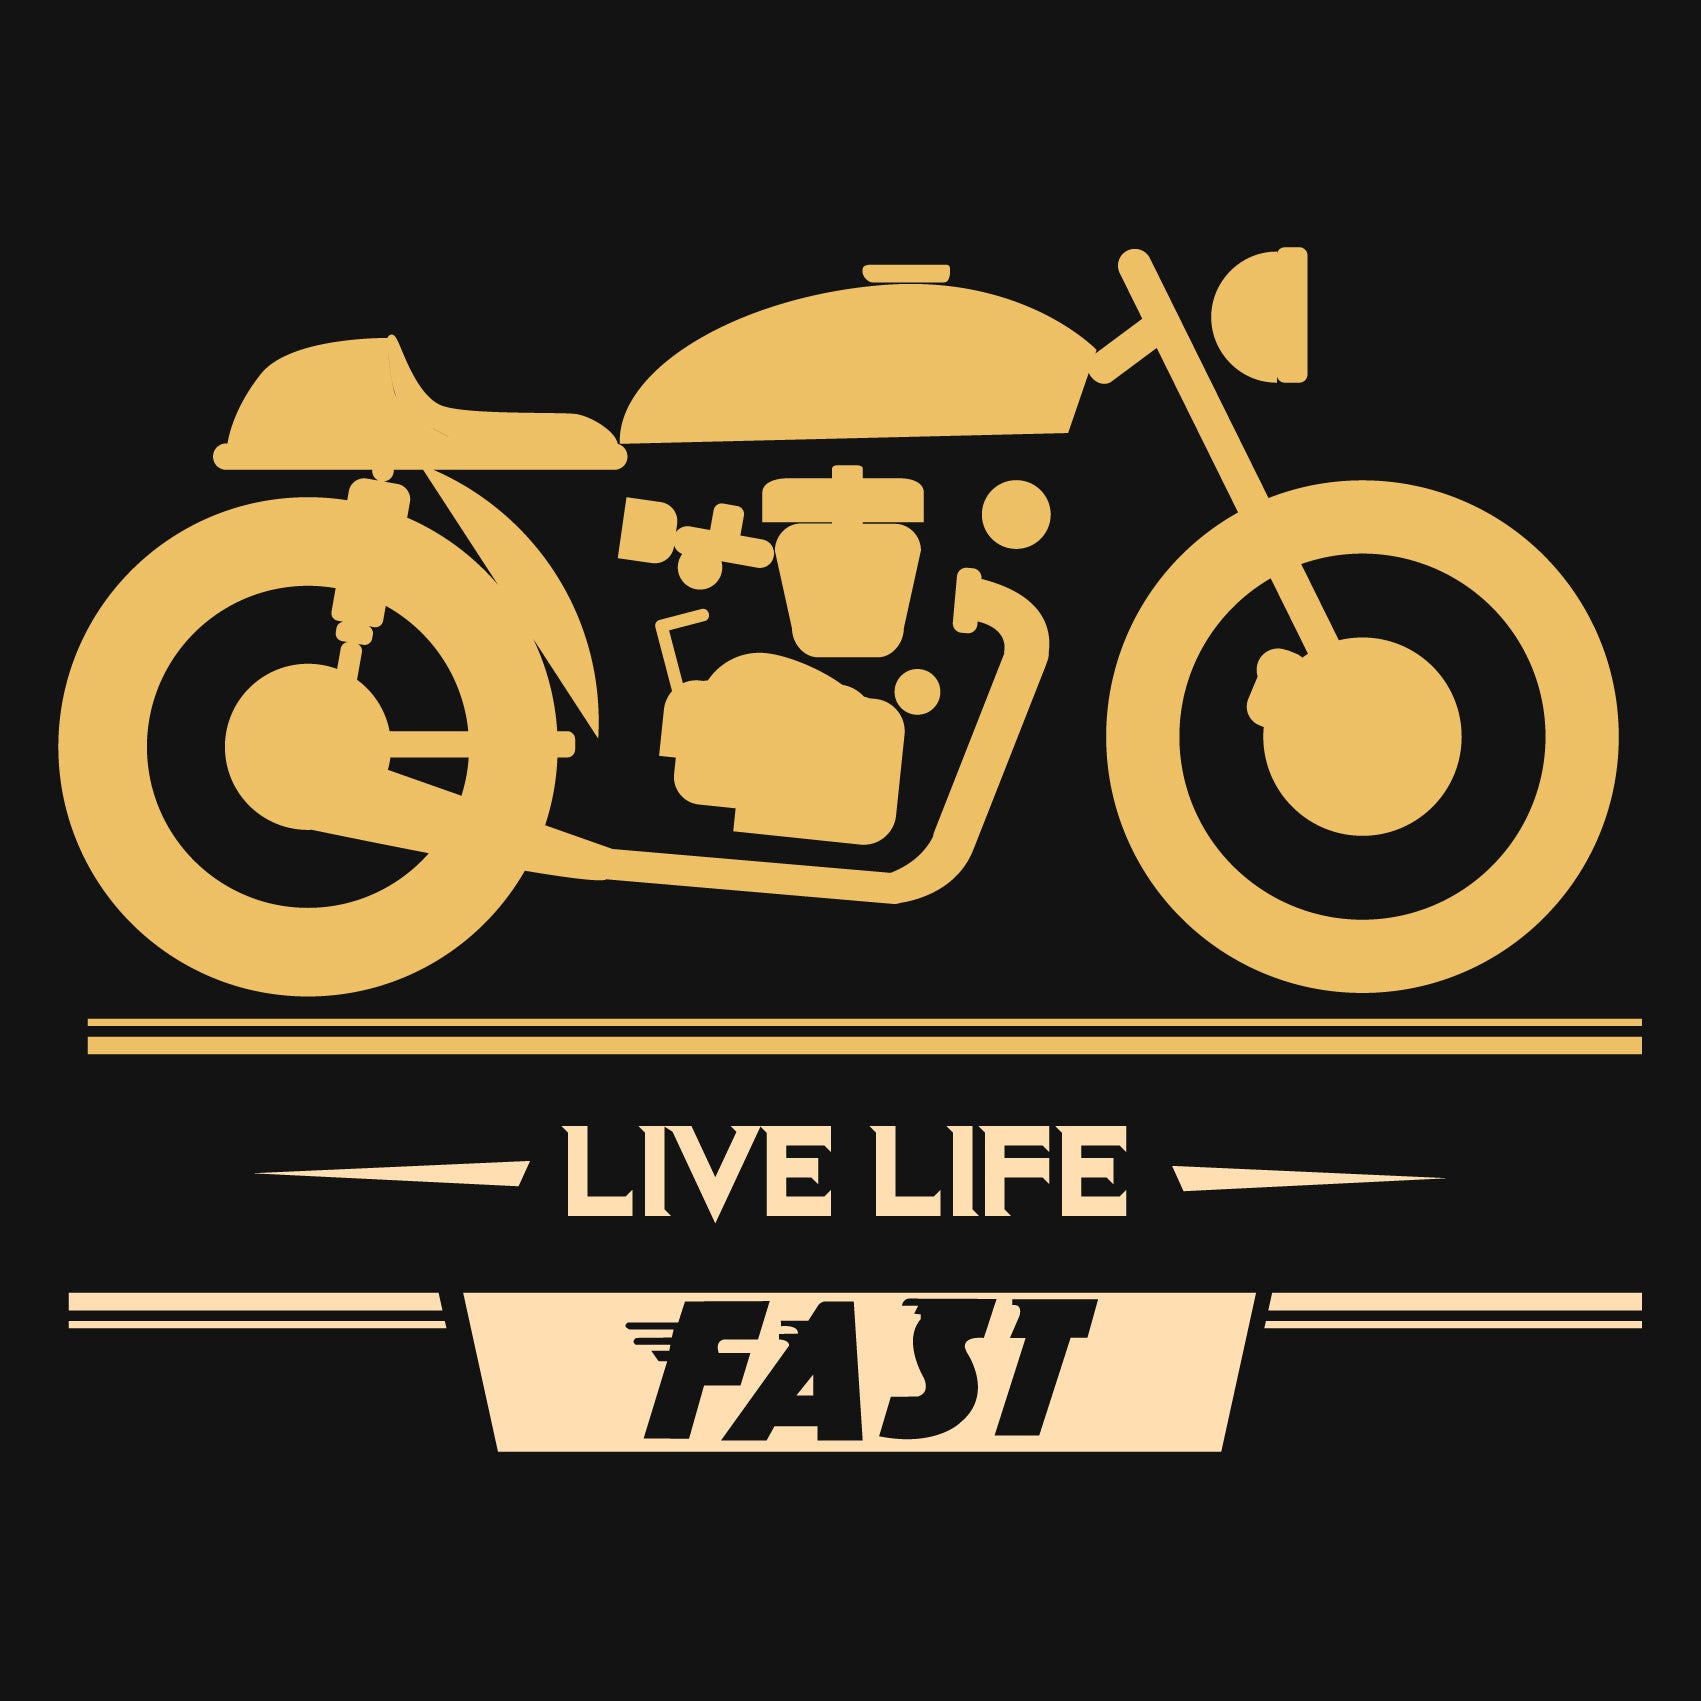 Live Life Fast Reactr Tshirts For Men - Eyewearlabs